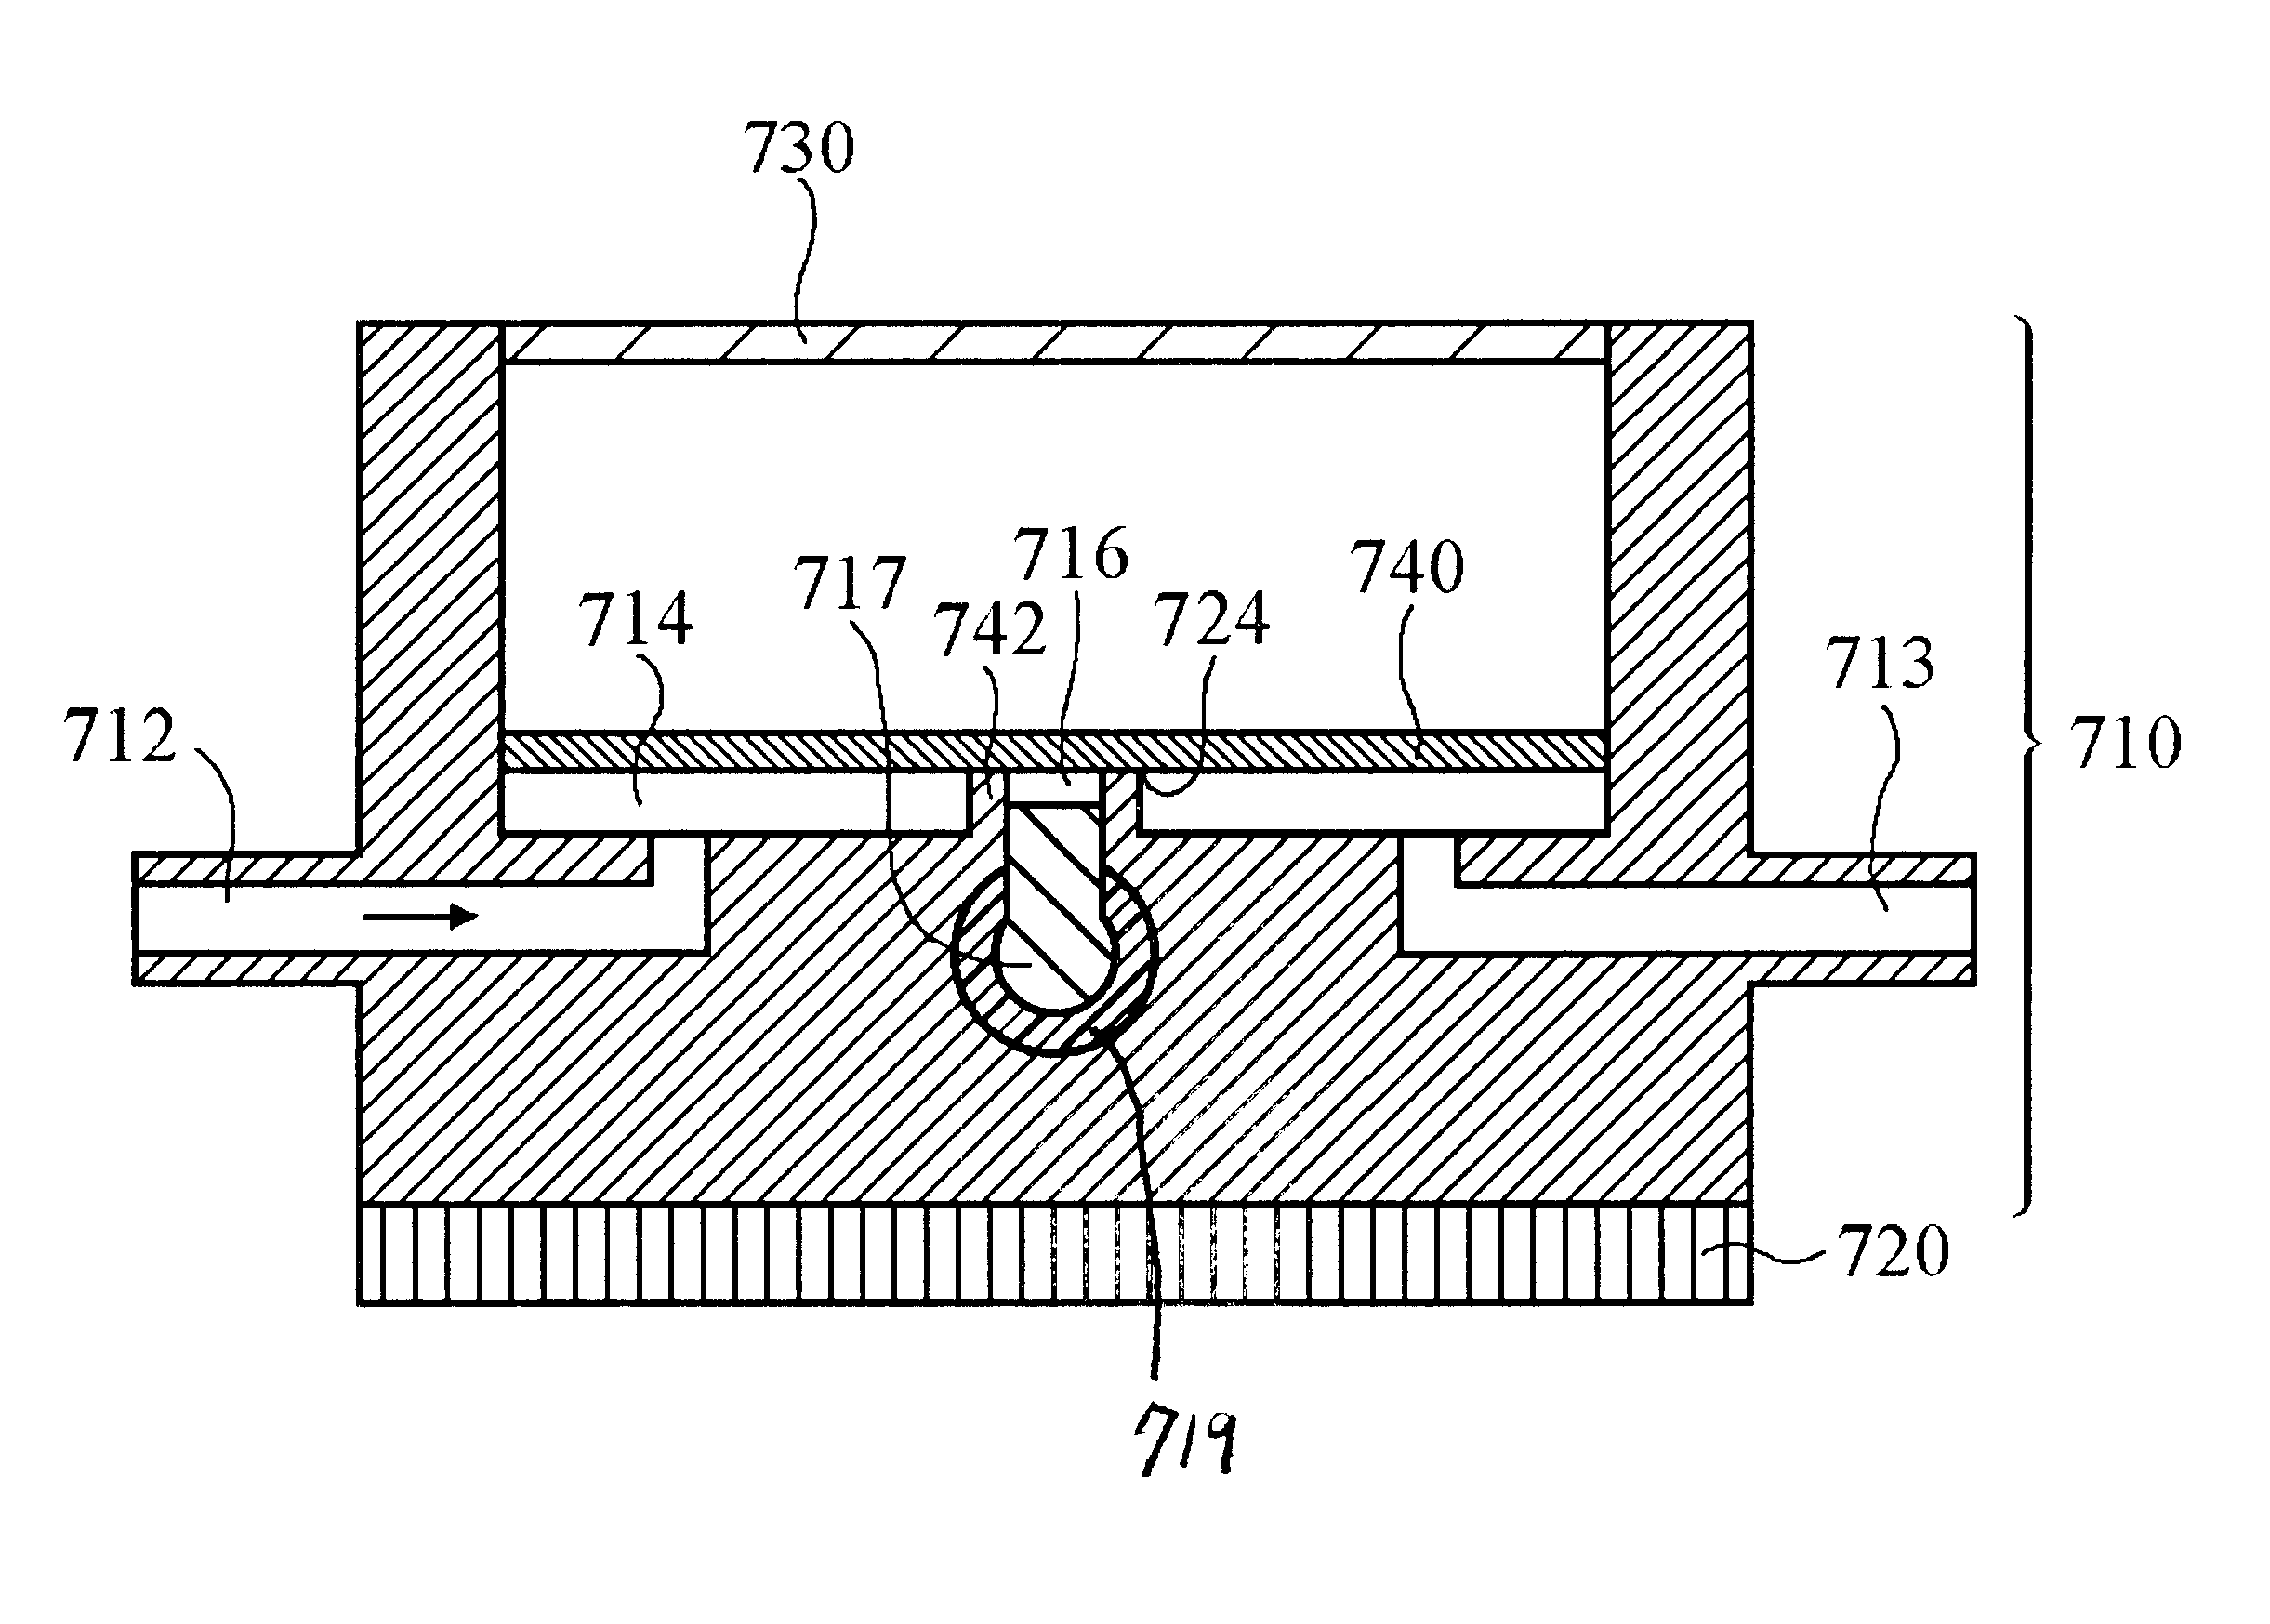 Method of vaporizing liquid sources and apparatus therefor